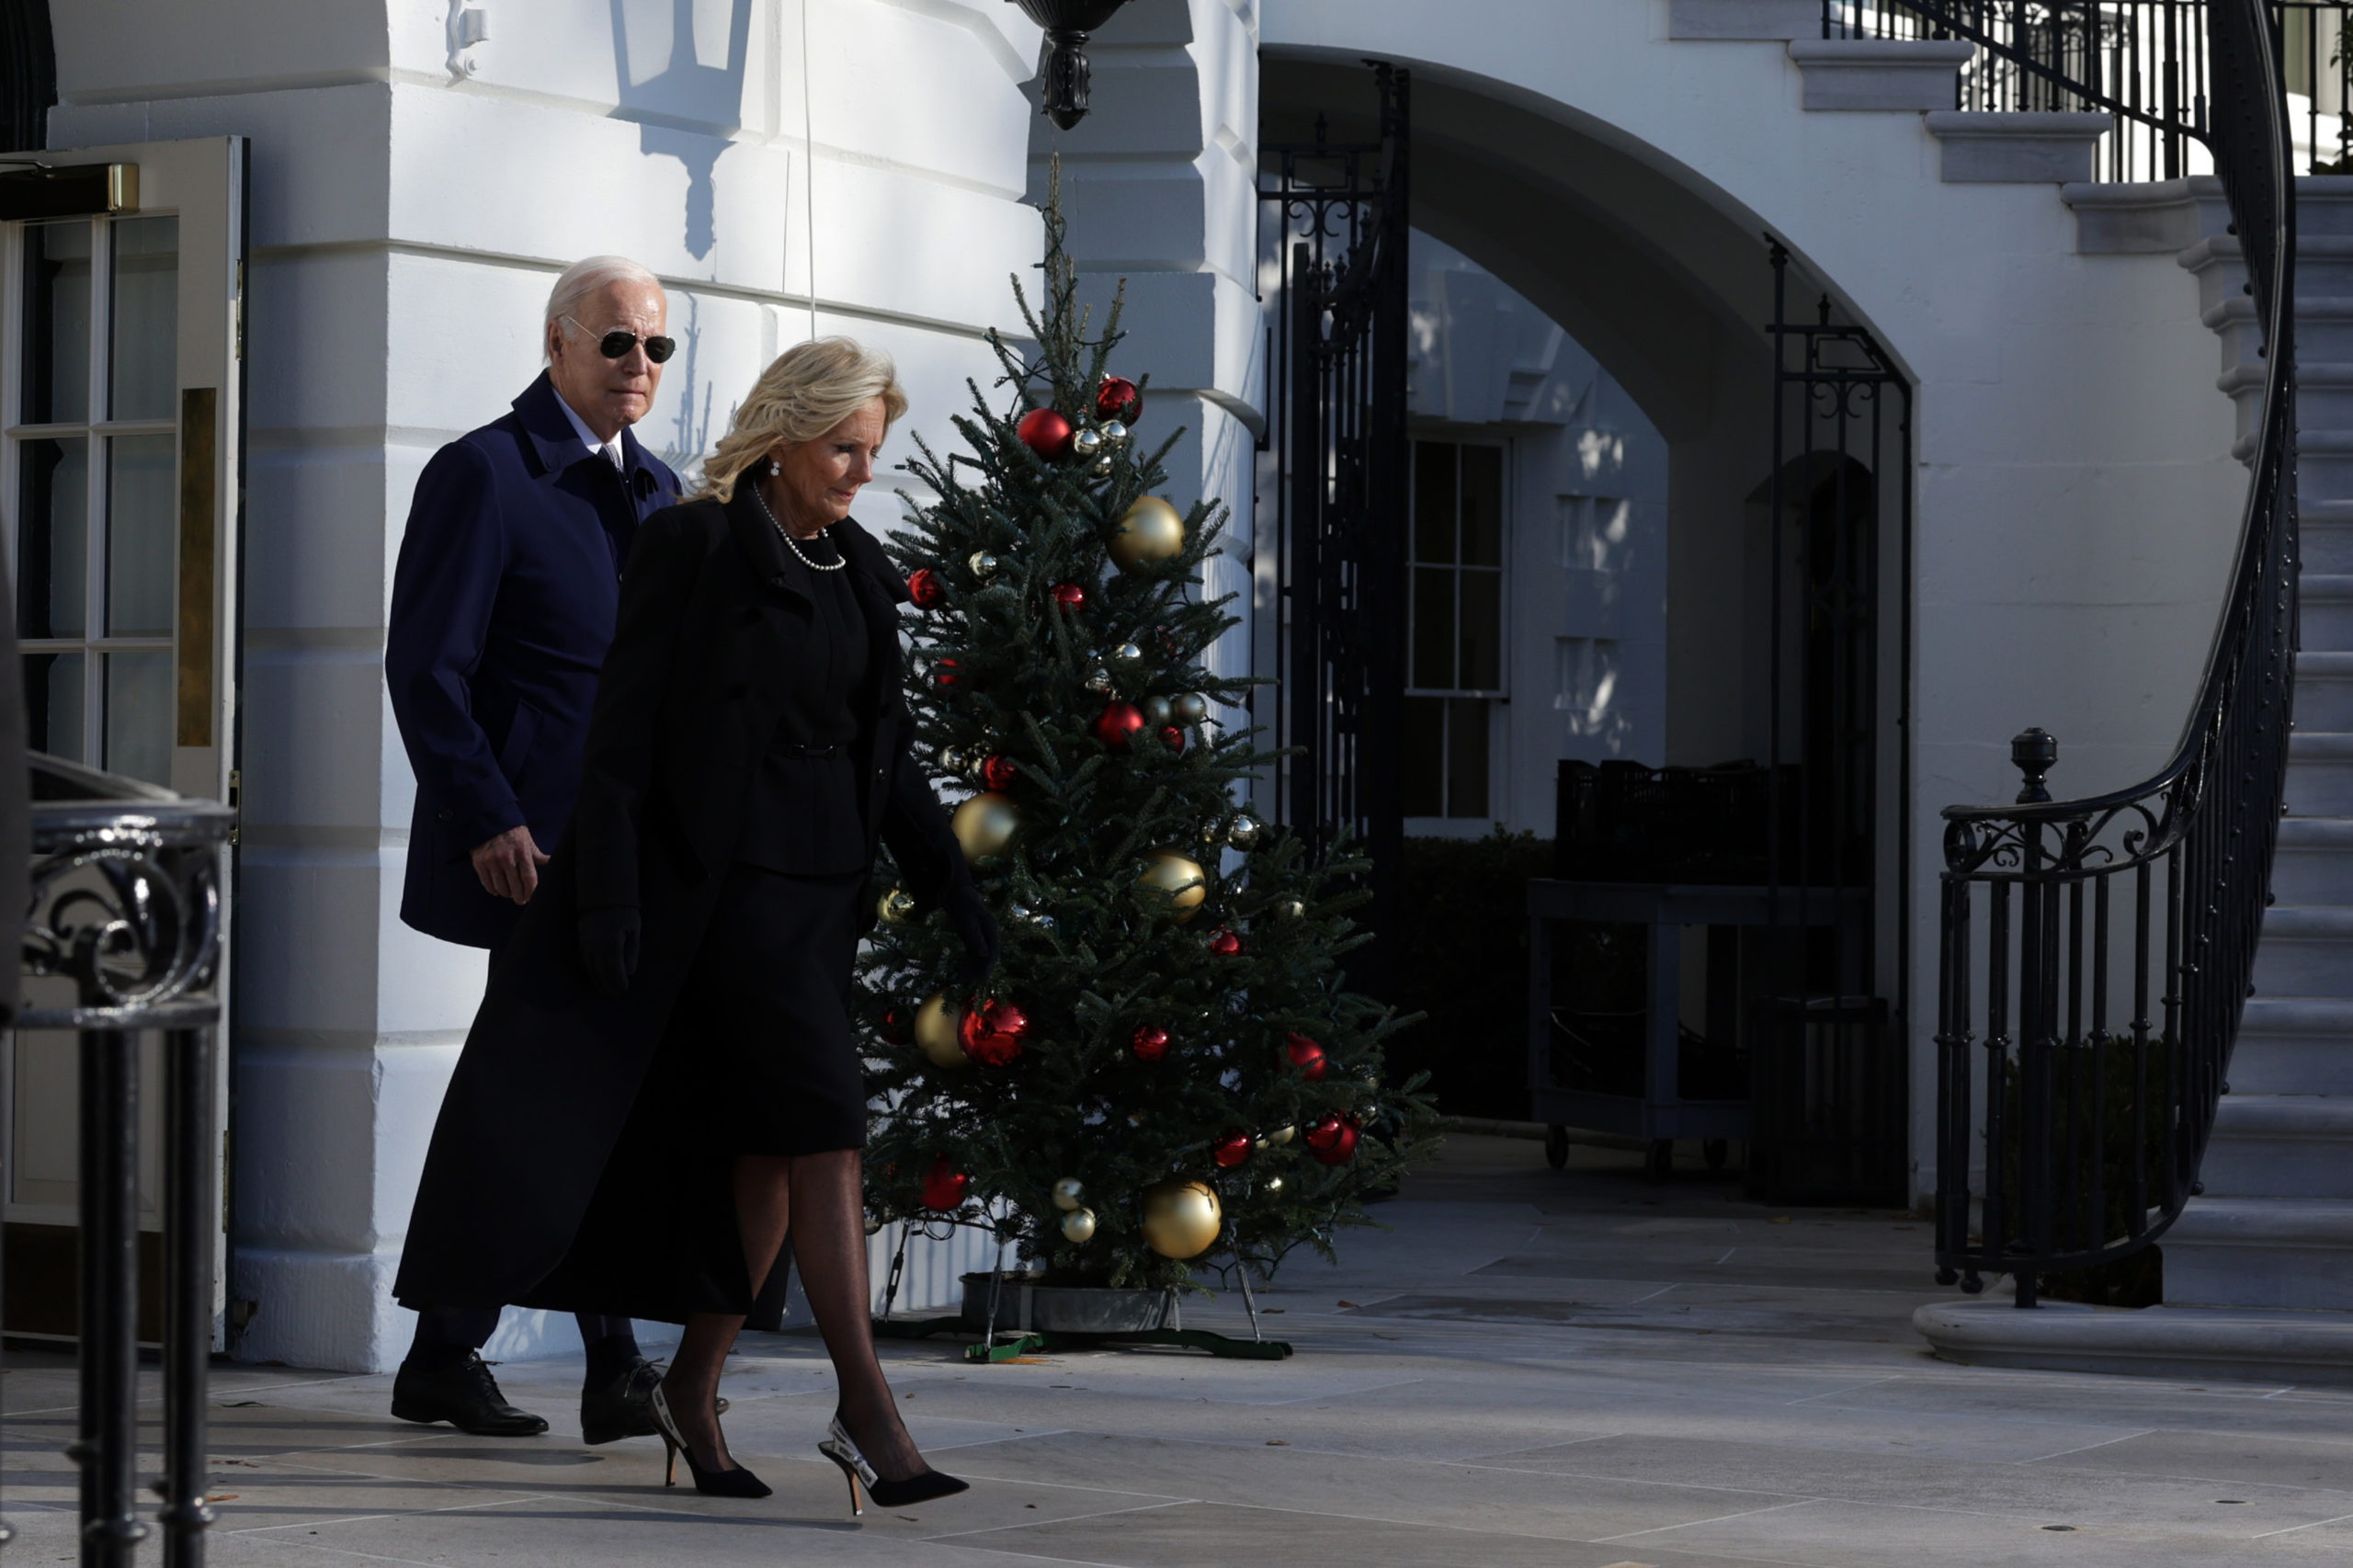 U.S. President Joe Biden and first lady Jill Biden walk towards Marine One prior to a departure from the White House on November 28, 2023 in Washington, DC. The Bidens are travelling to Atlanta, Georgia to attend a tribute service for former first lady Rosalynn Carter, who passed away on November 19 at the age of 96. (Photo by Alex Wong/Getty Images)